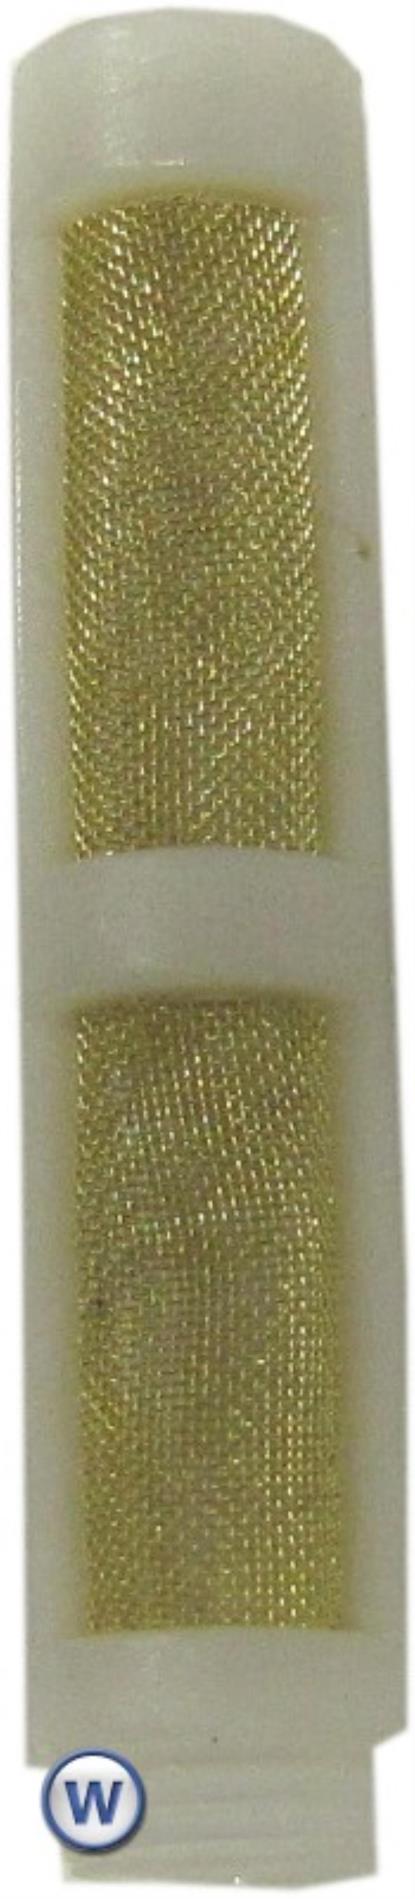 Picture of Petrol/Fuel Tap Replacement Filter for 745010/11/12/13 (Per 25)